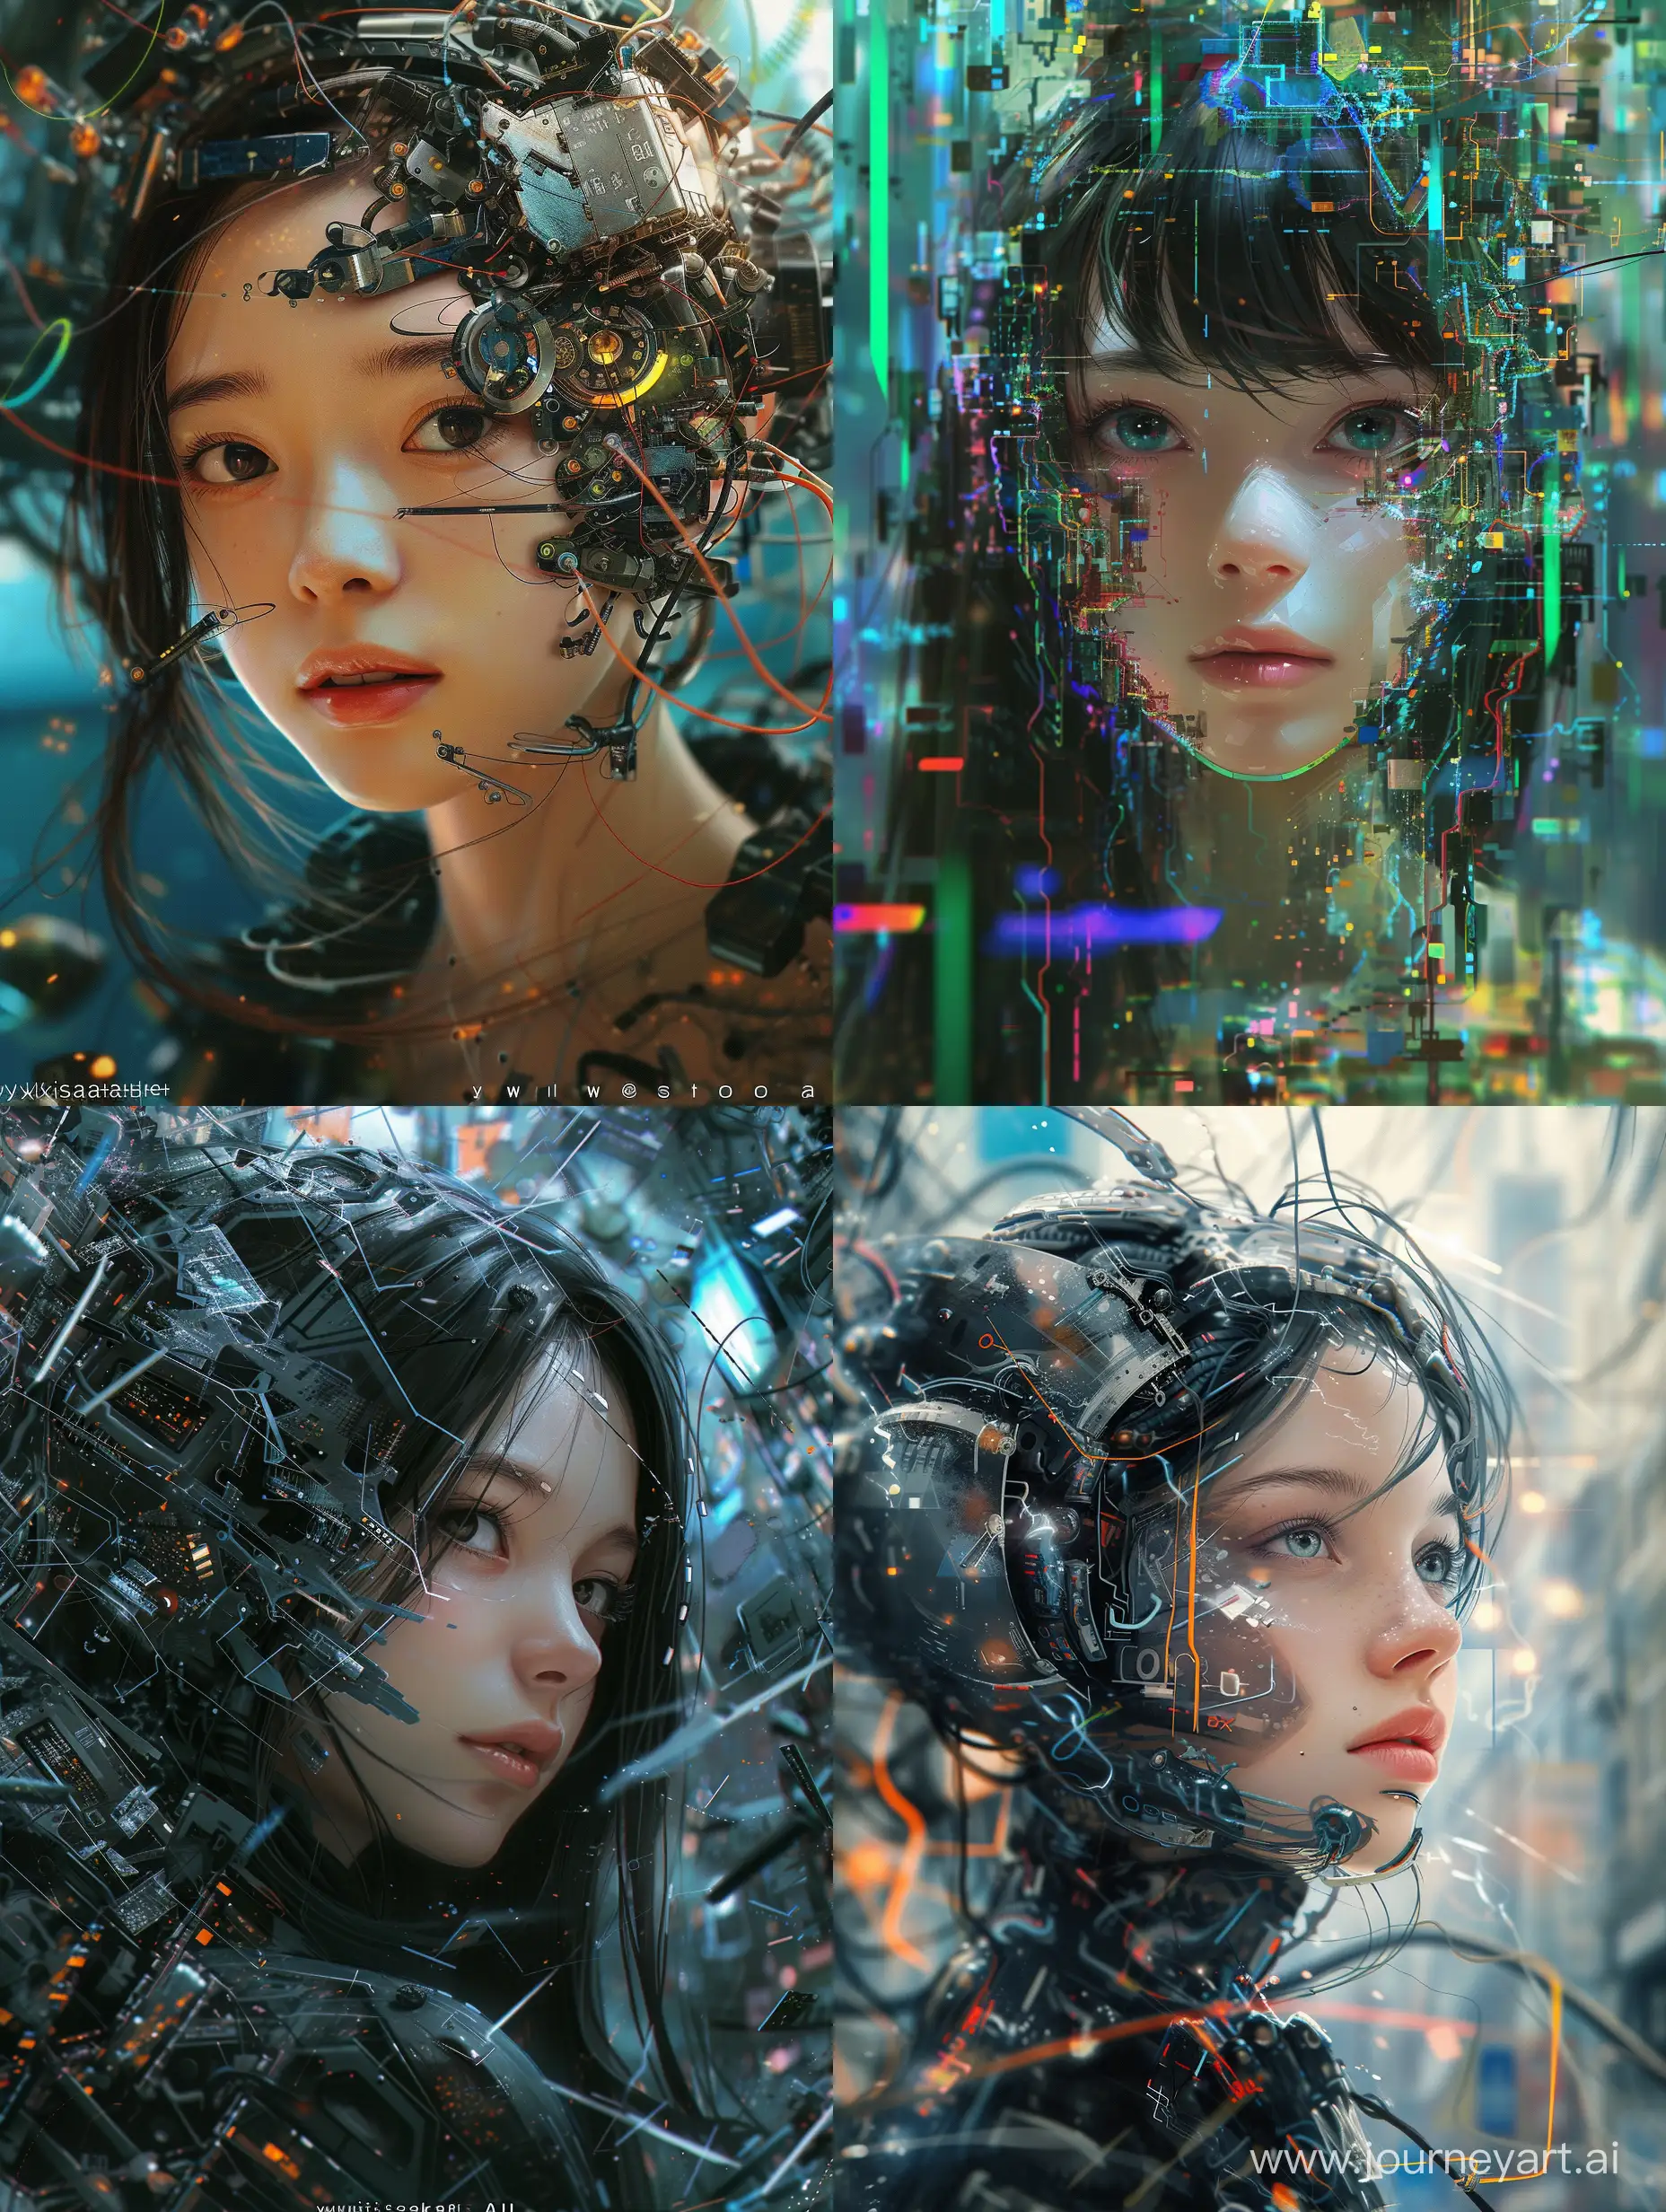 high quality, 8K Ultra HD, In the chaotic realm of a malfunctioning and unpredictable AI, emerges a portrait of an unexpectedly beautiful woman, The creation of a Broken AI adds an element of unpredictability and uniqueness to the portrayal, resulting in a blend of technological chaos and unexpected beauty, by yukisakura, awesome full color,